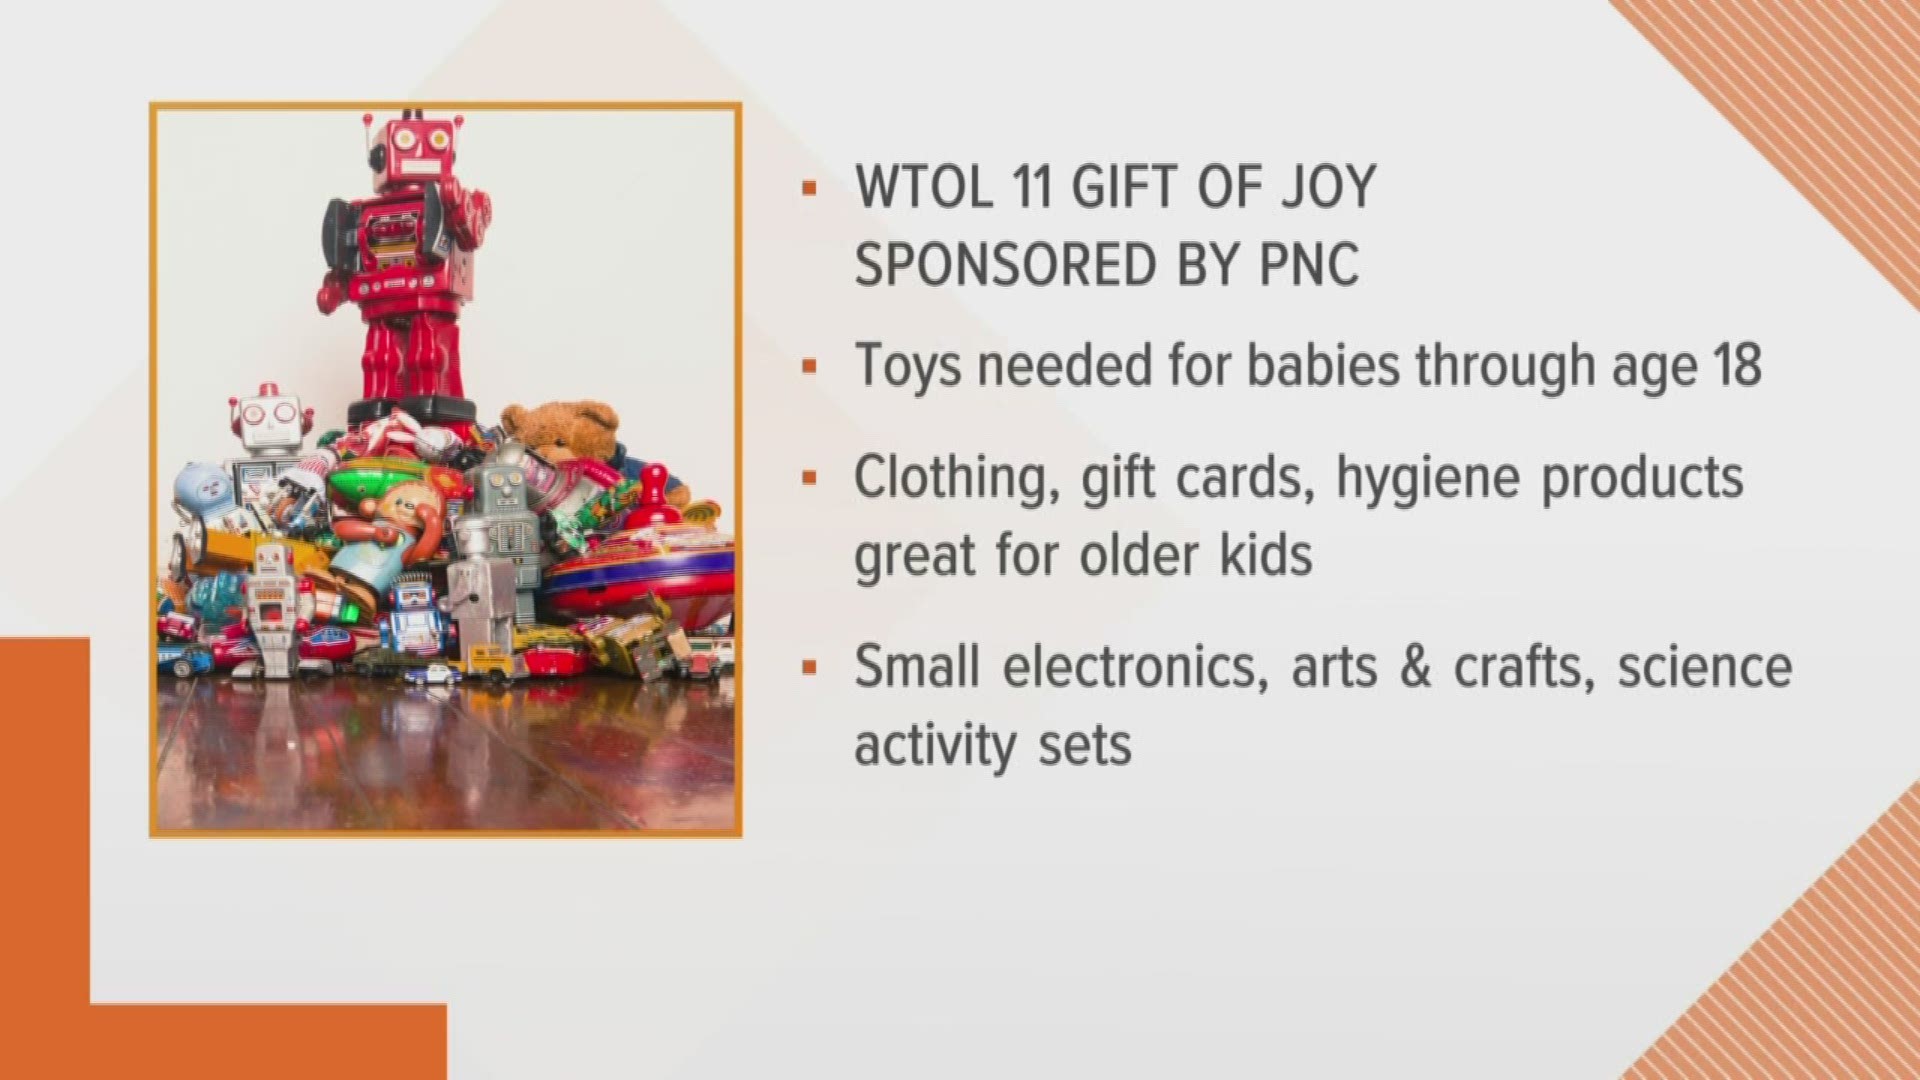 We are less than a week away from our downtown drop for the WTOL 11 Gift of Joy. Here's how you can get involved.